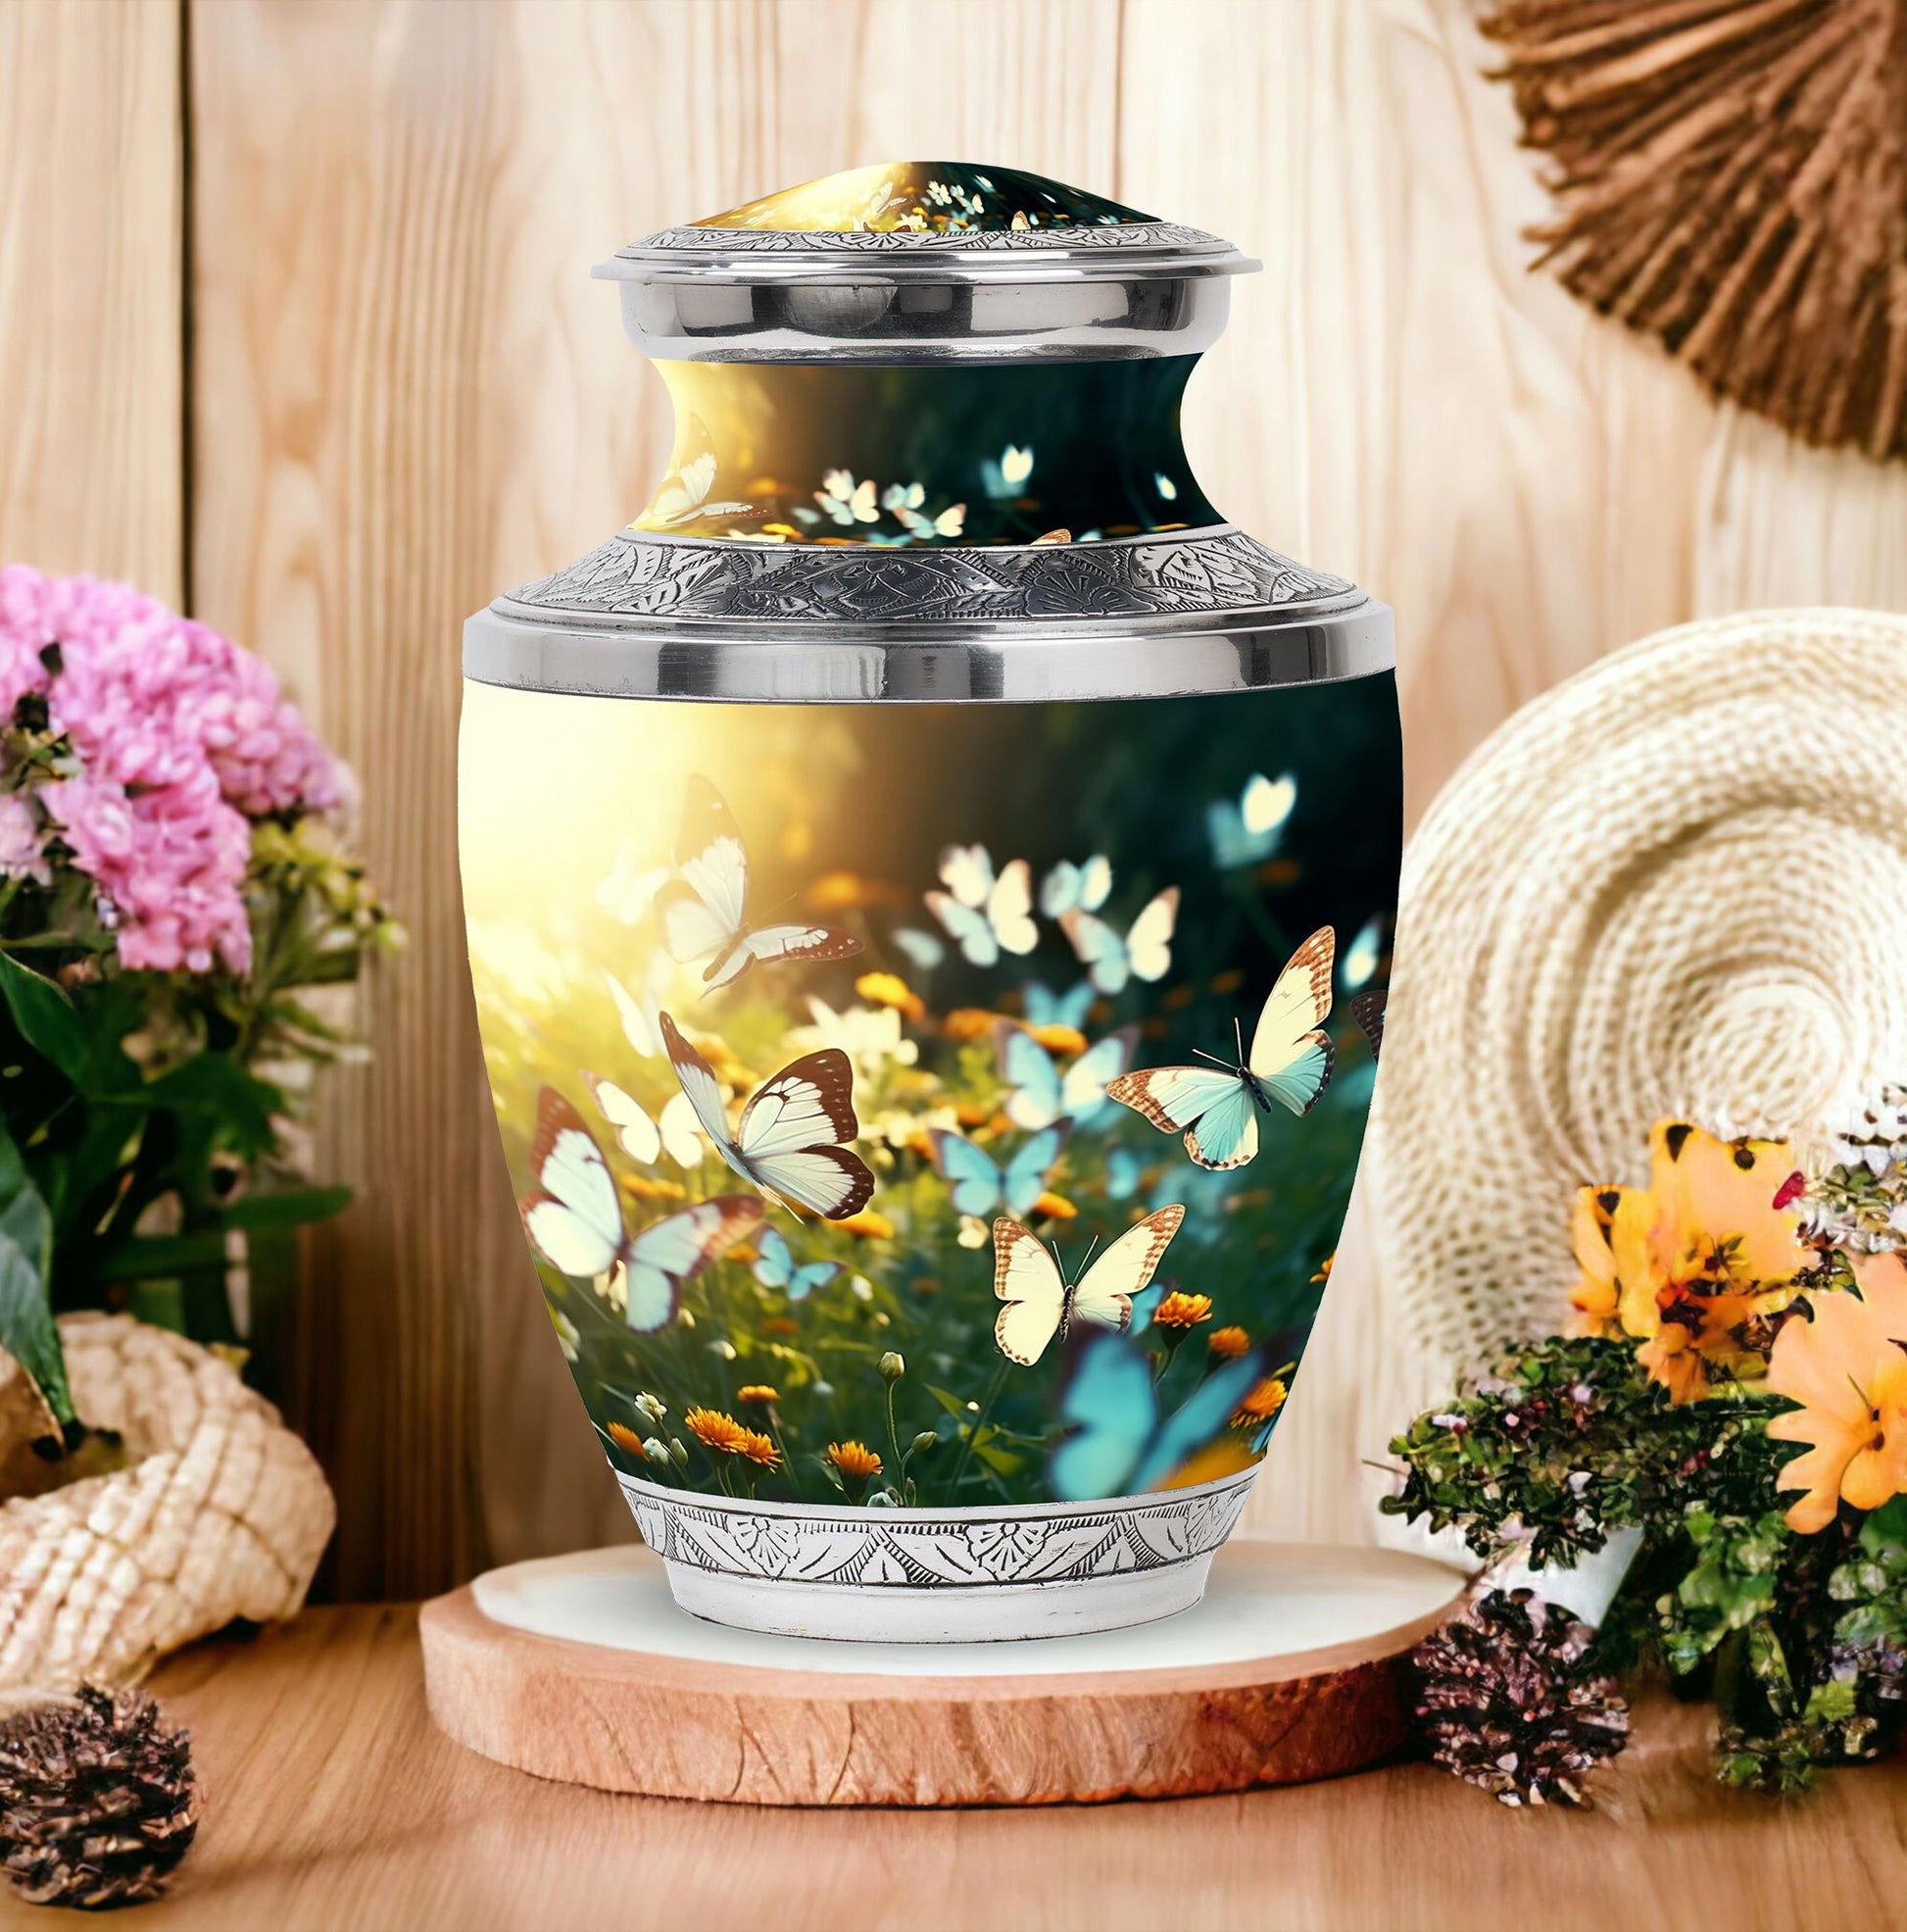 Butterflies Memorial Urn for storing cremated remains, ideal for men's burial and funeral urns